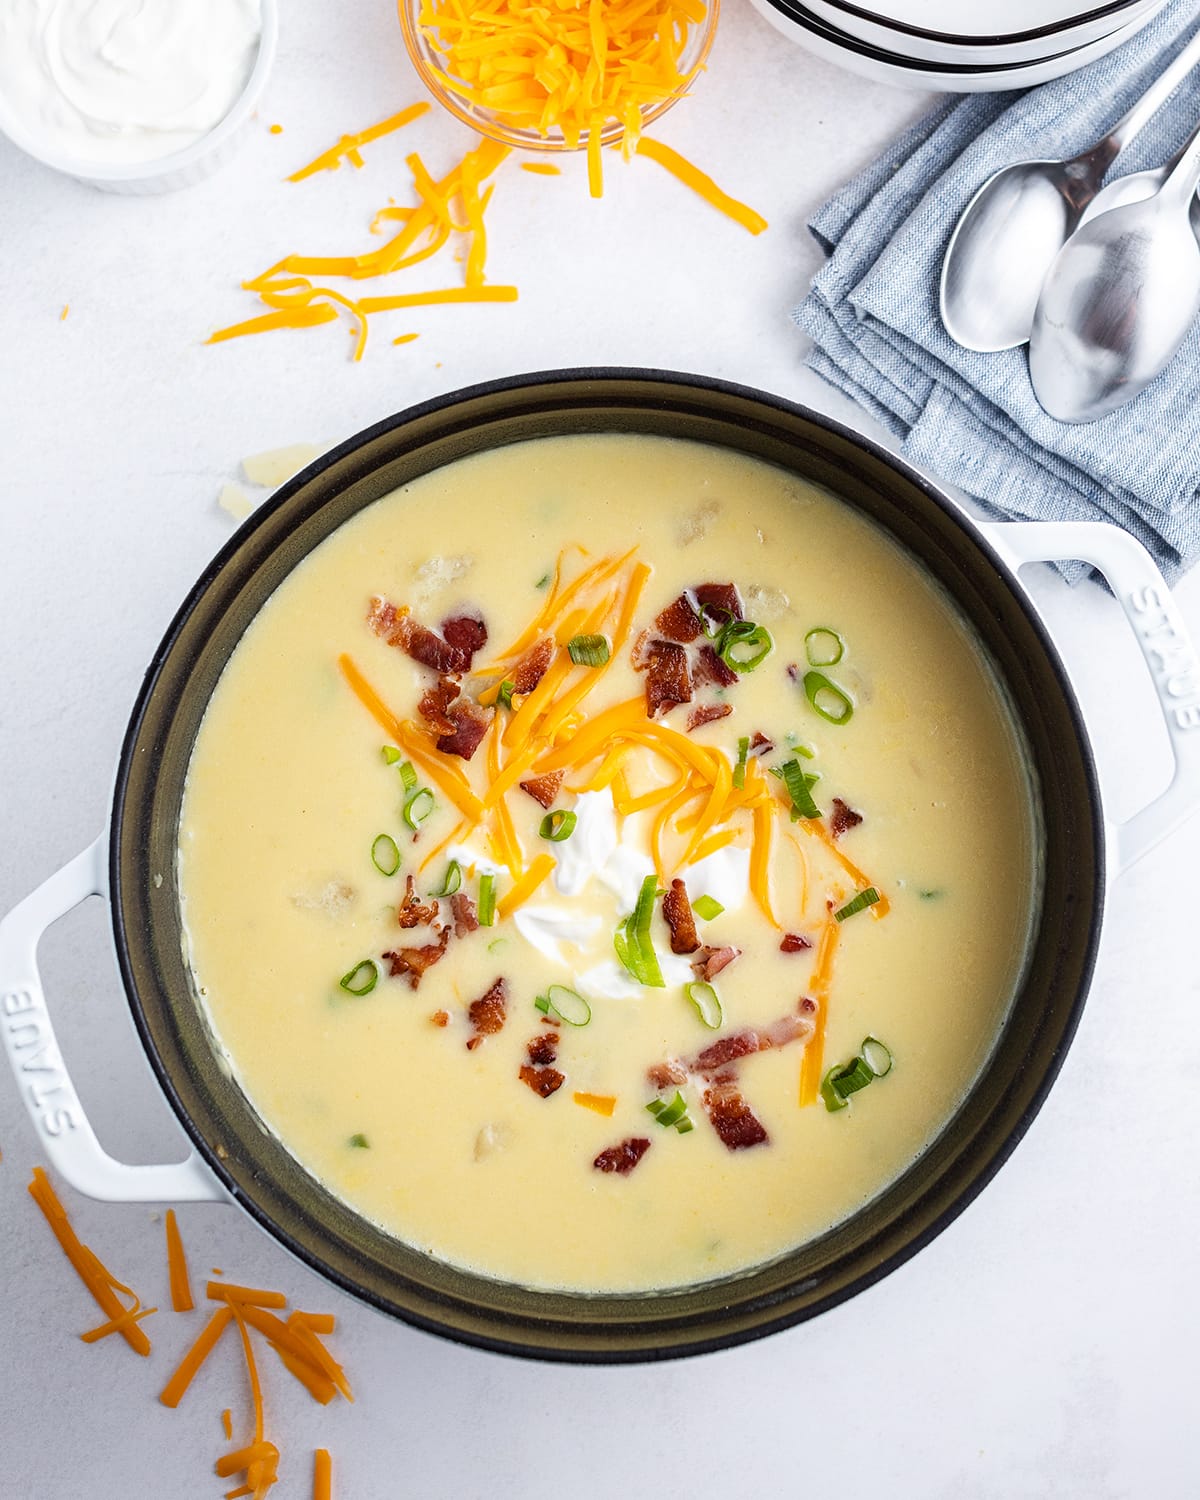 A pot of baked potato soup topped with sour cream, shredded cheese, crumbled bacon, and green onion.